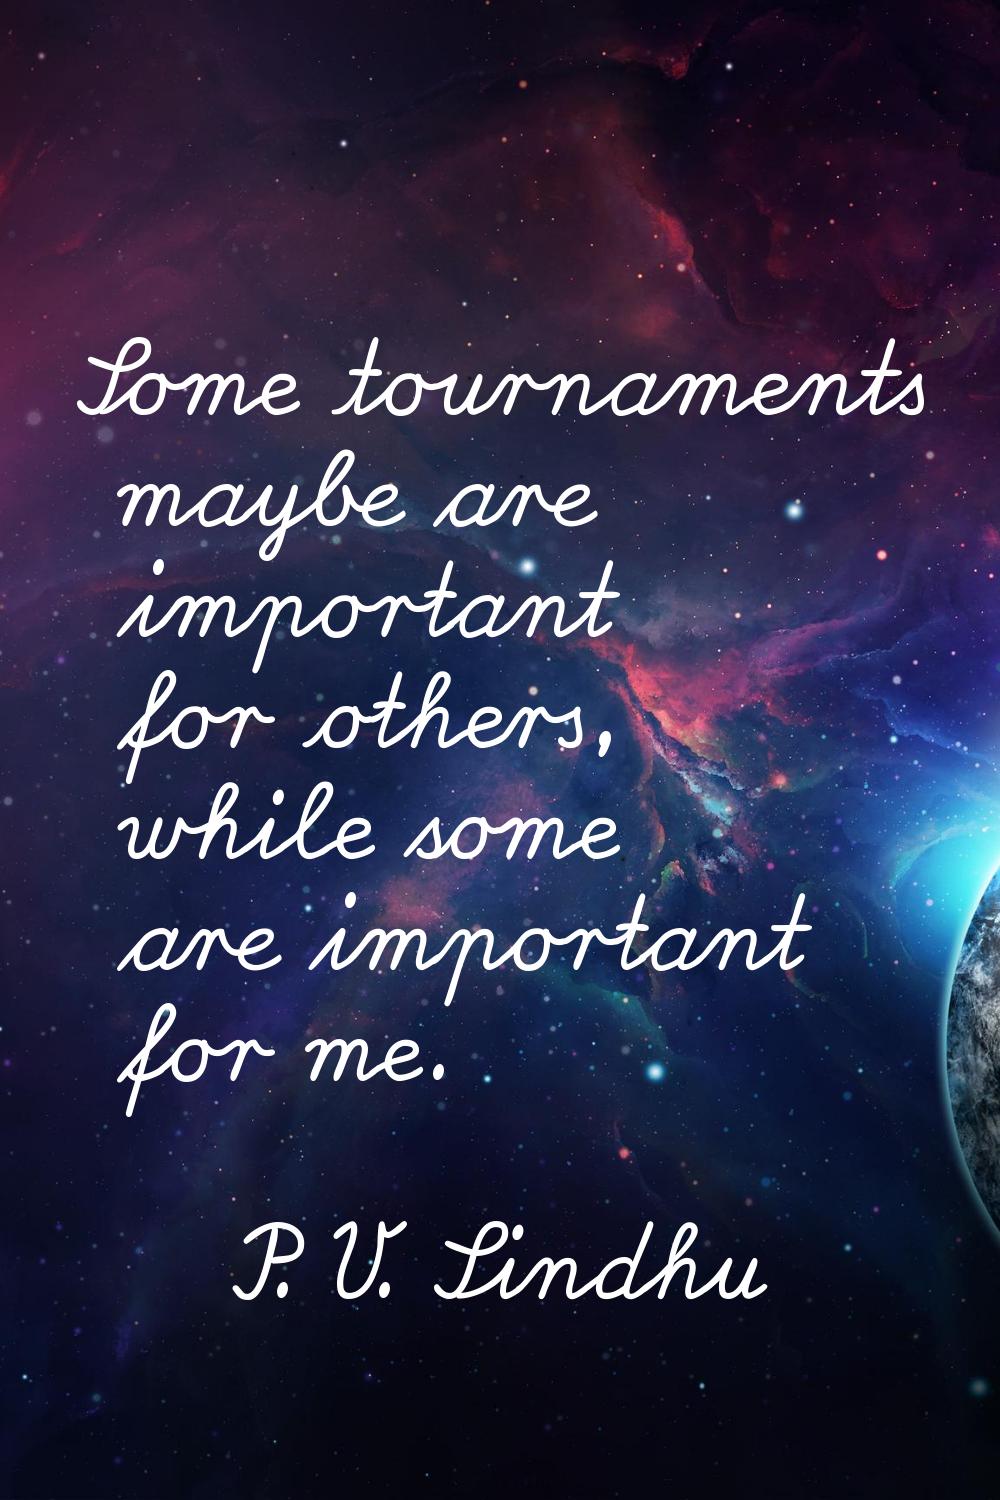 Some tournaments maybe are important for others, while some are important for me.